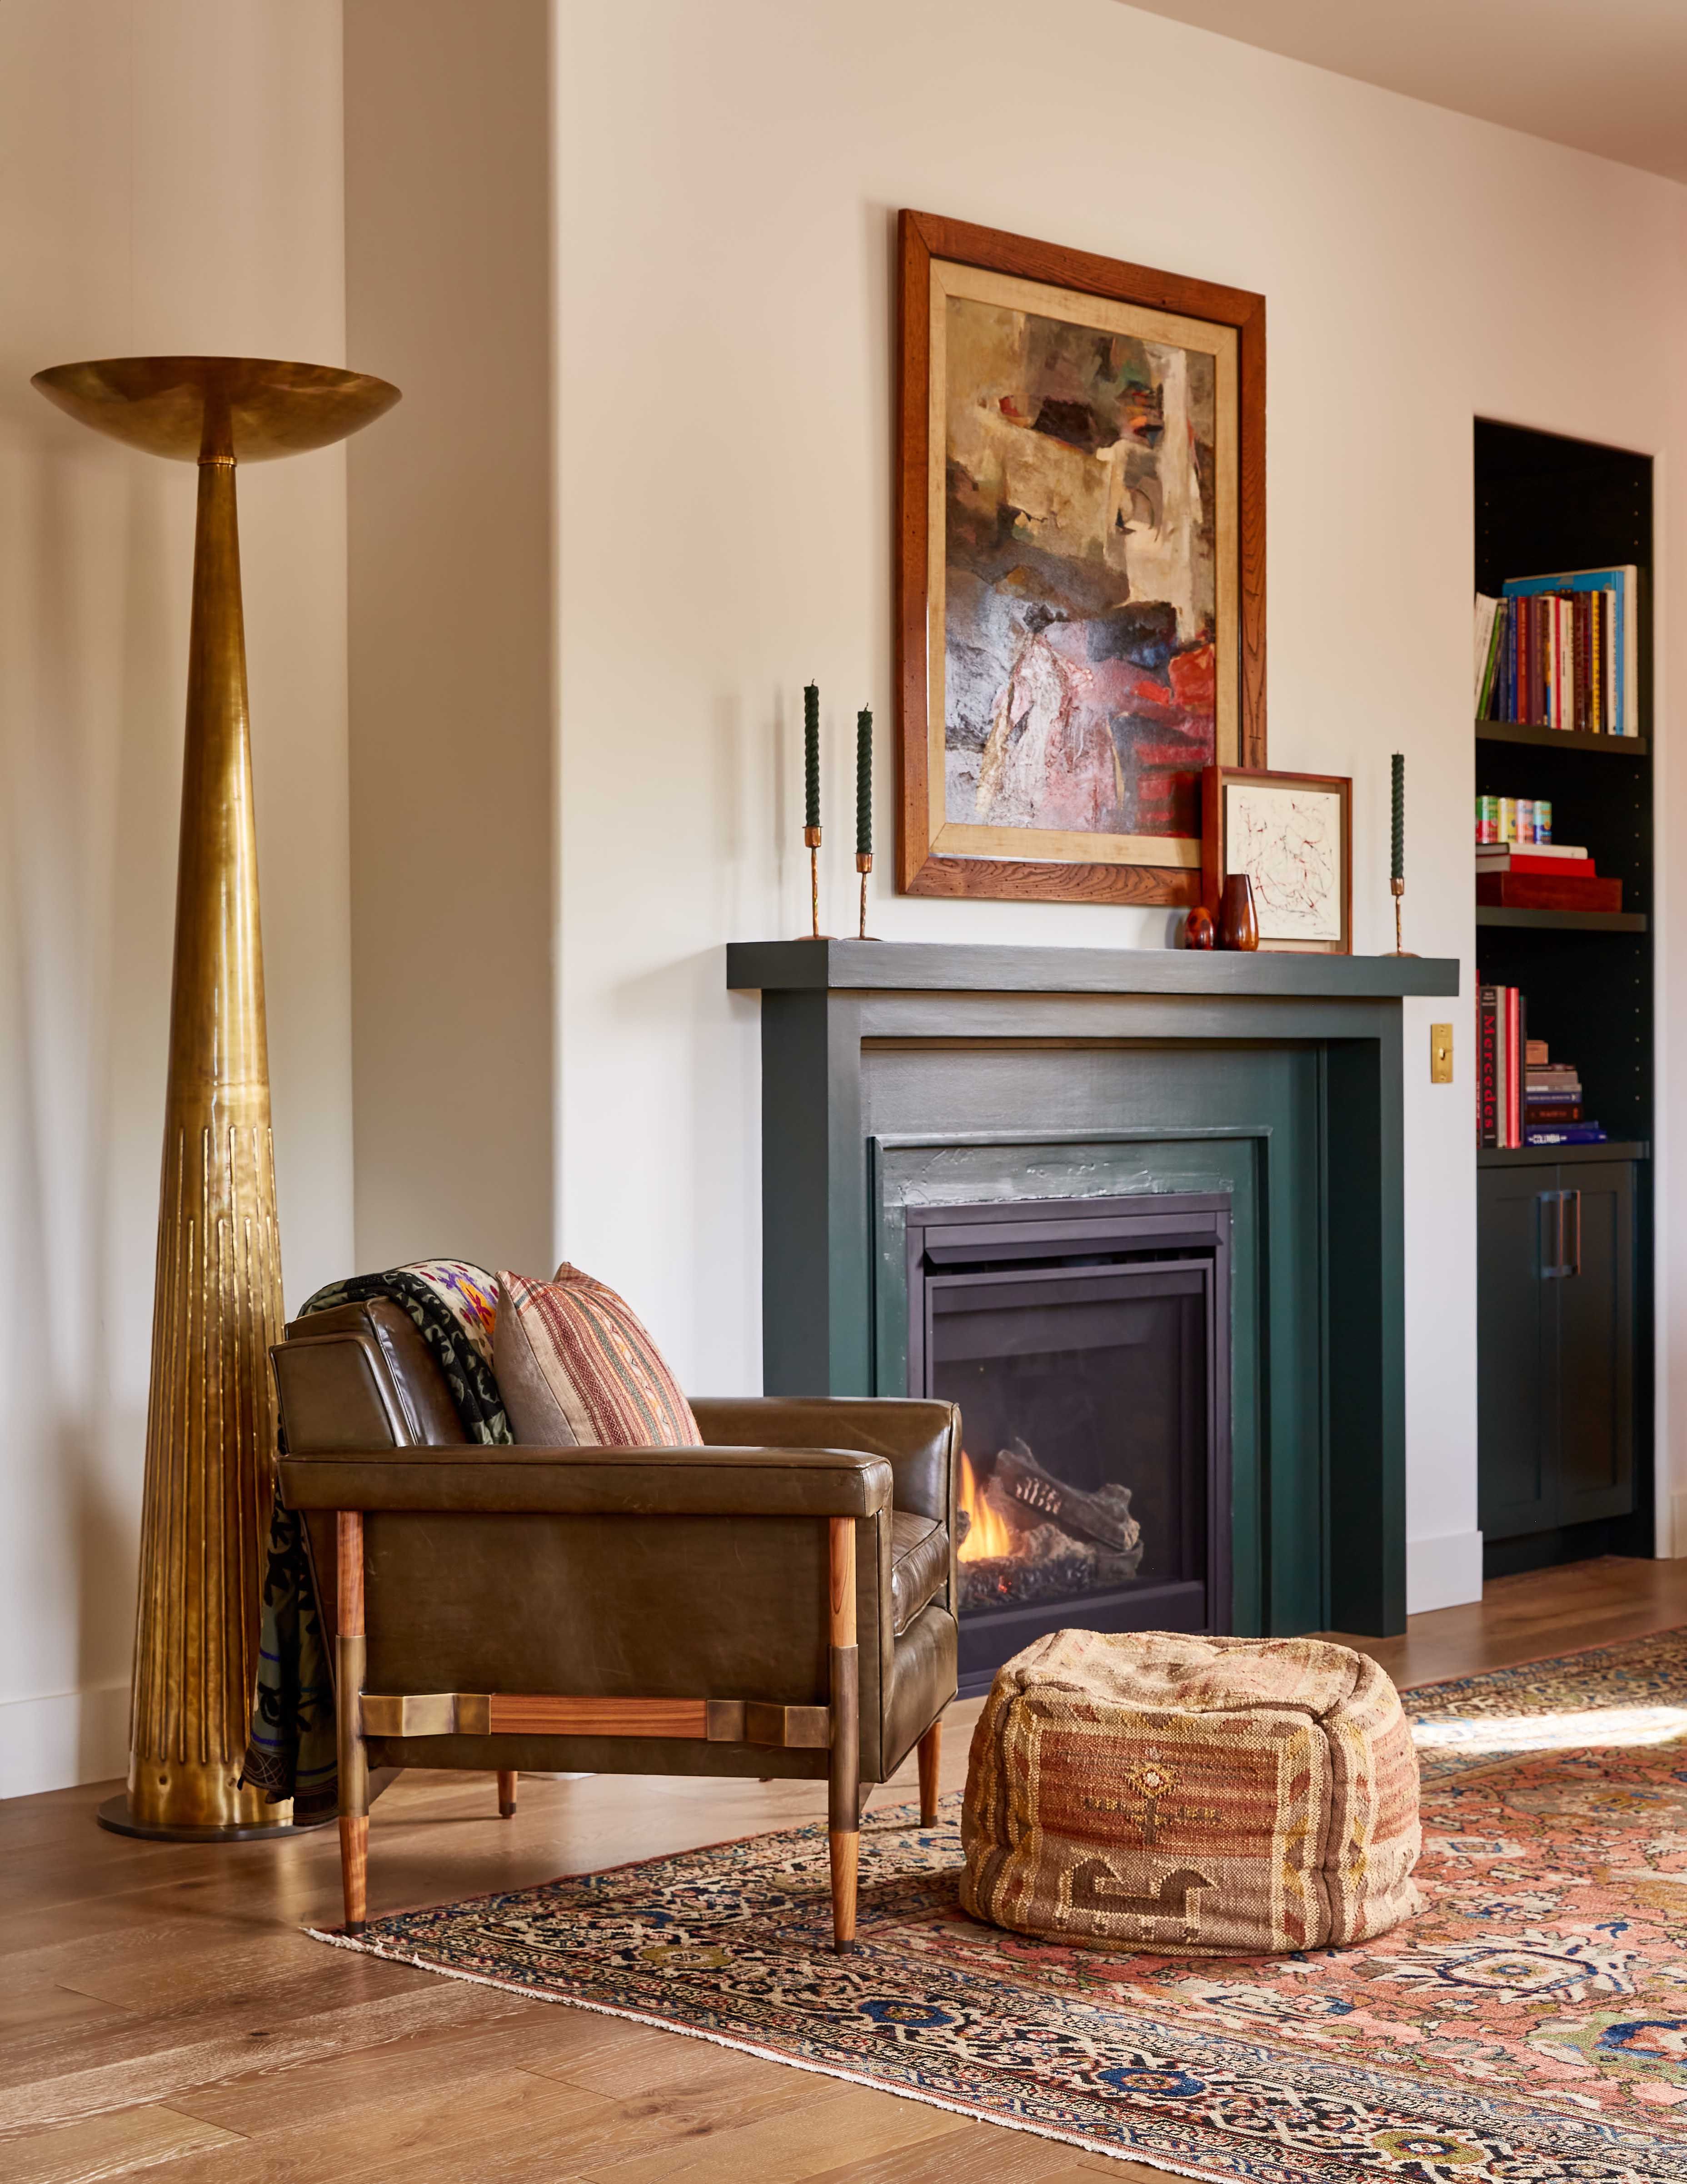 The Fireplace Mantel: How to Make it Chic and Modern